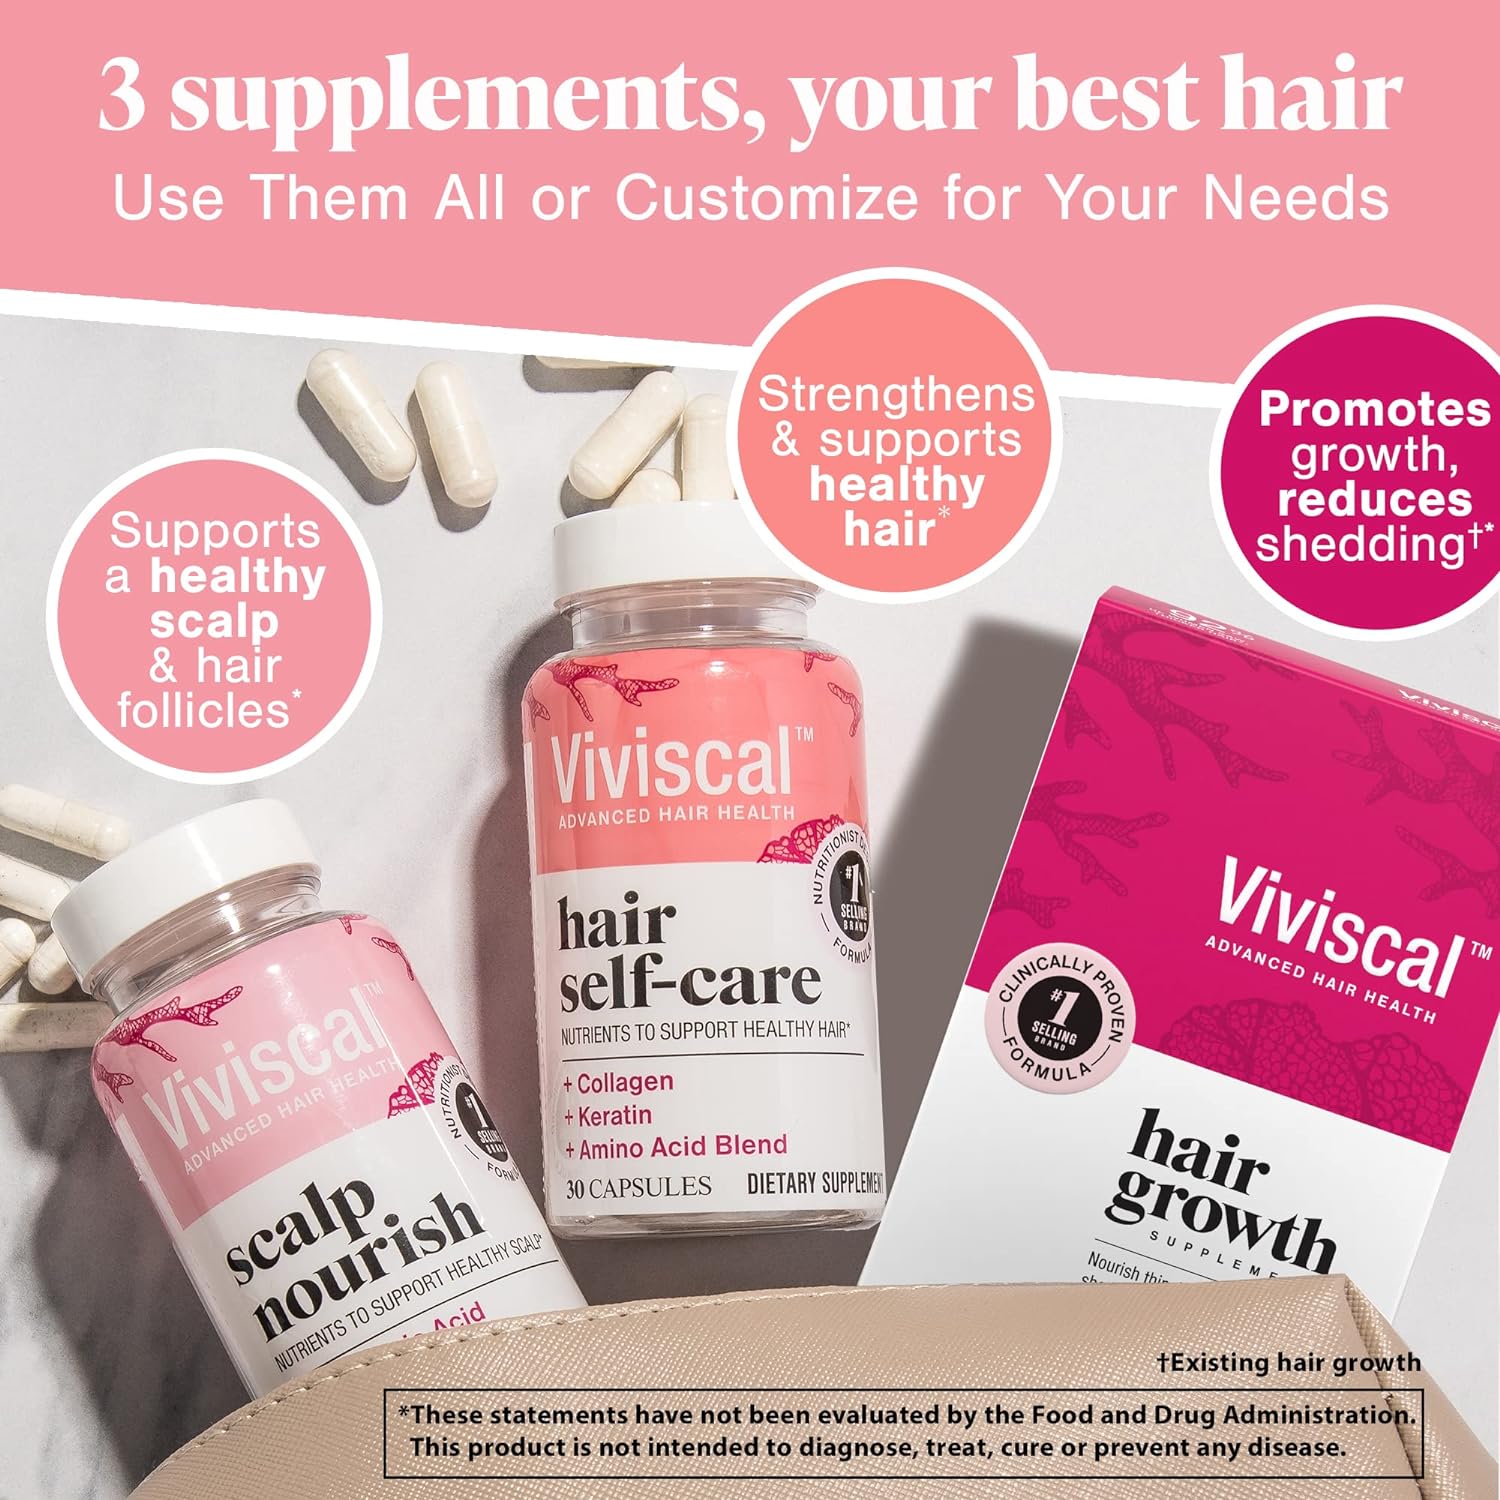 three supplements, your best hair, showing Viviscal scalp nourish, hair self-care, and hair growth